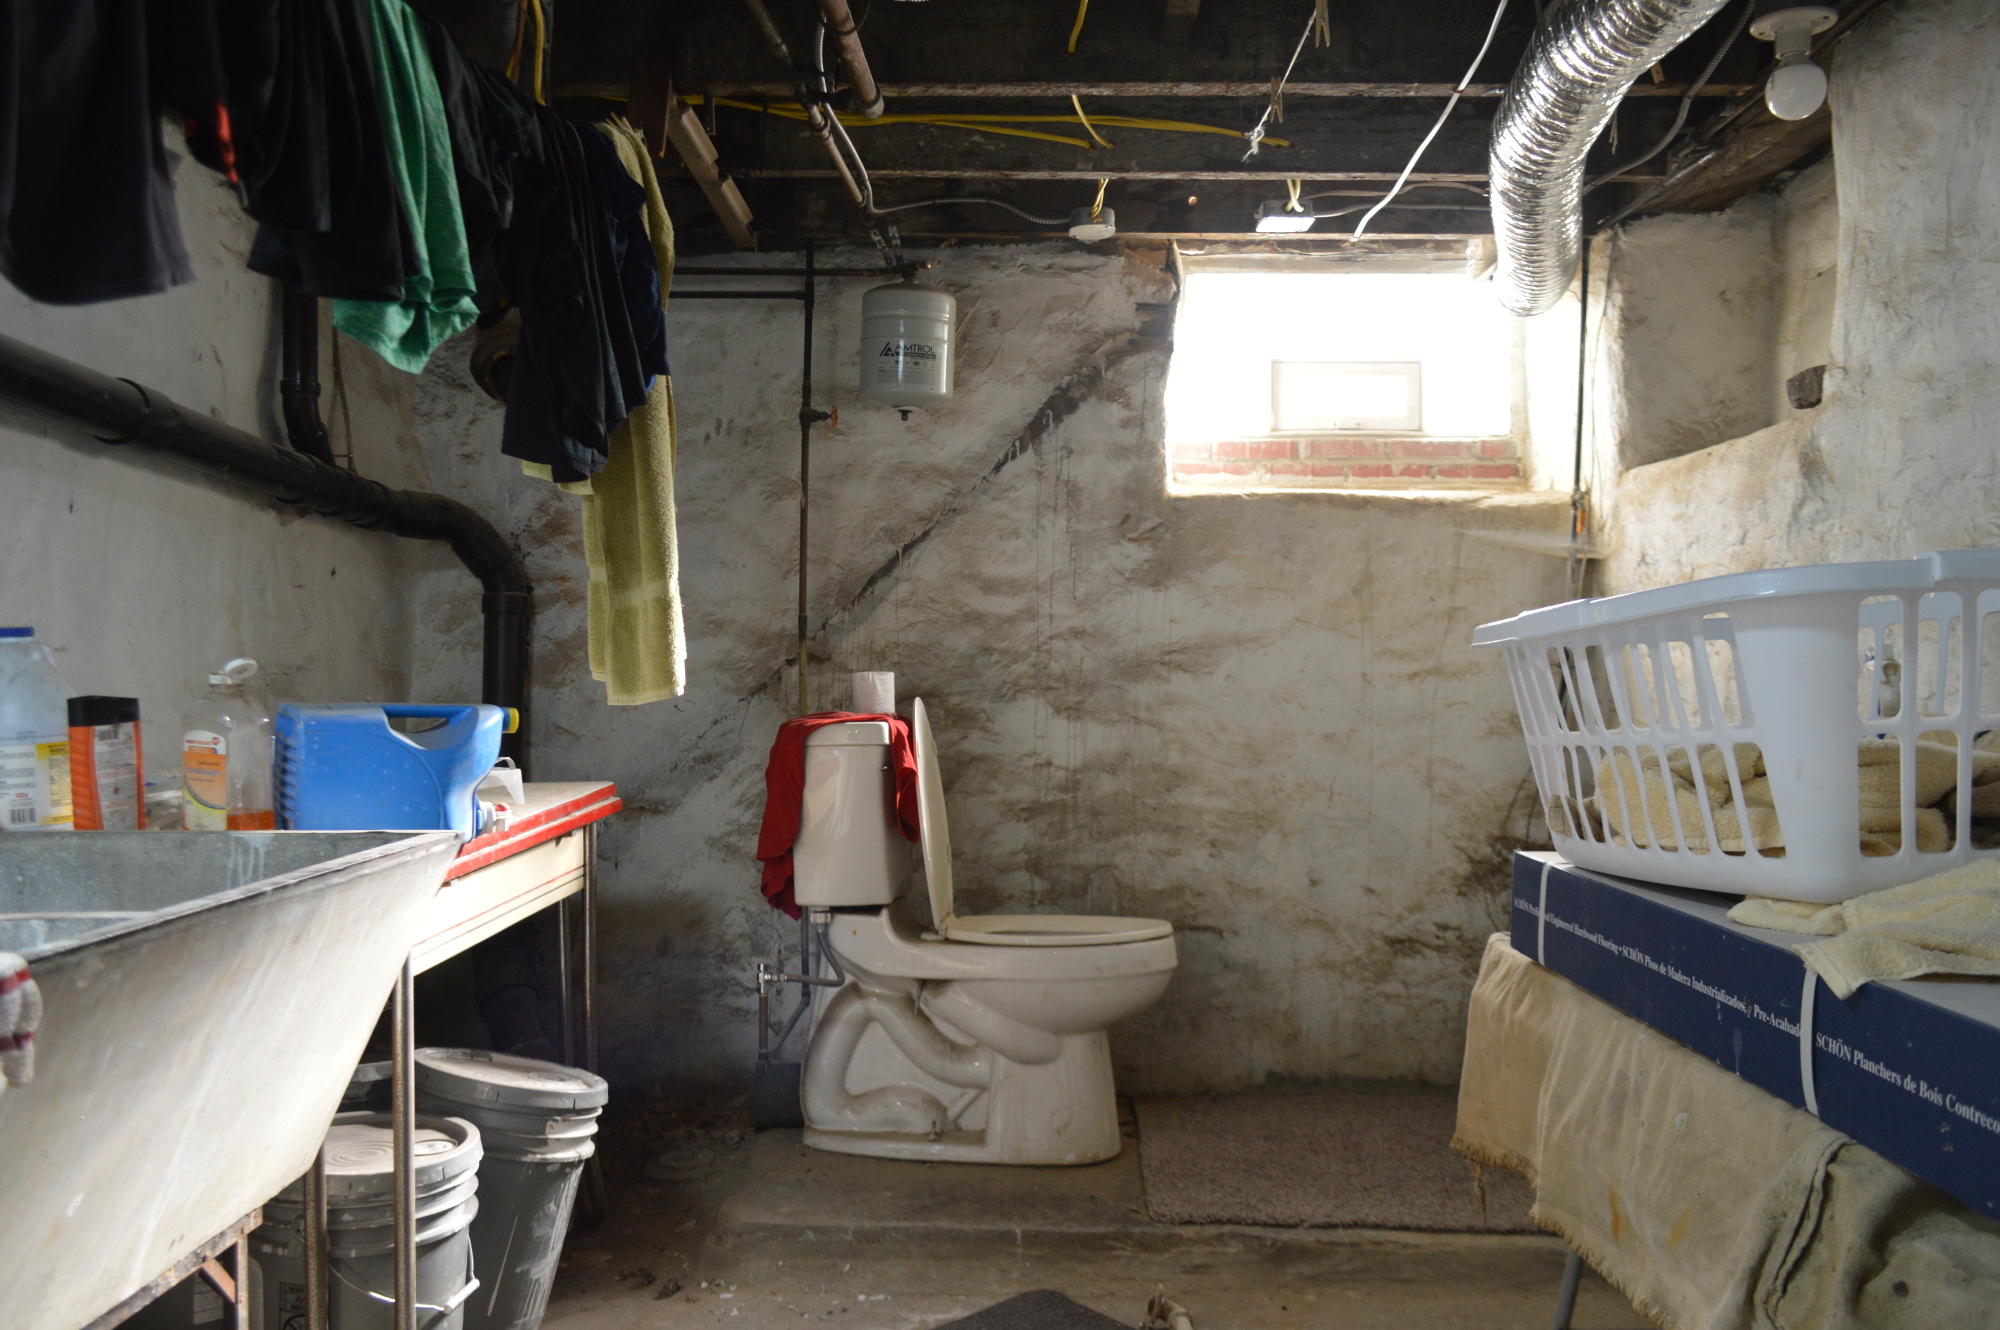 Unfinished and creepy basement laundry room.